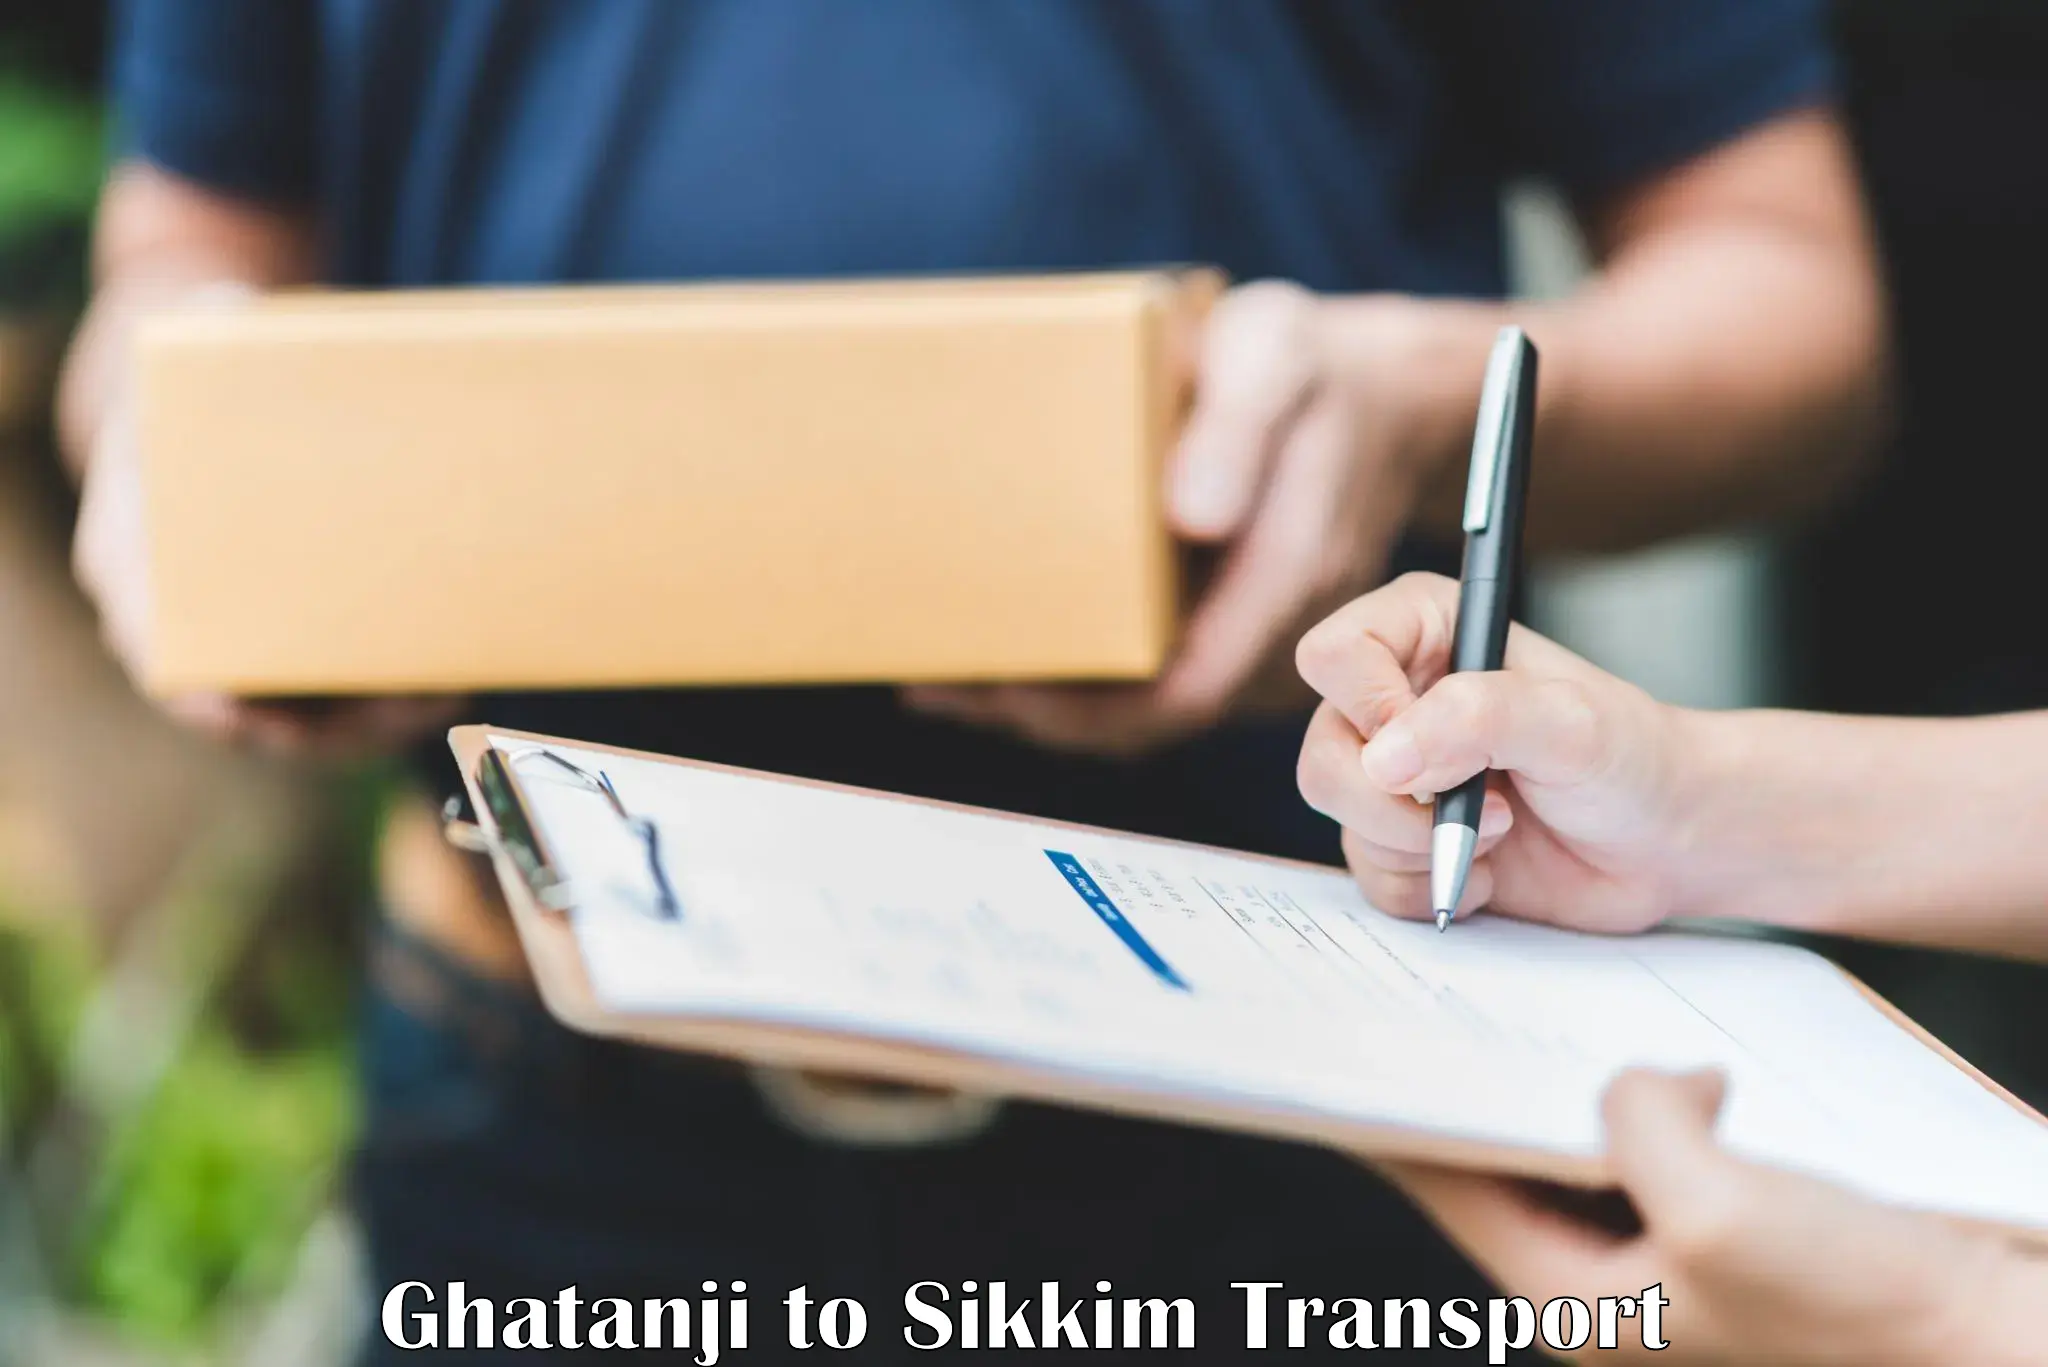 Commercial transport service Ghatanji to Sikkim